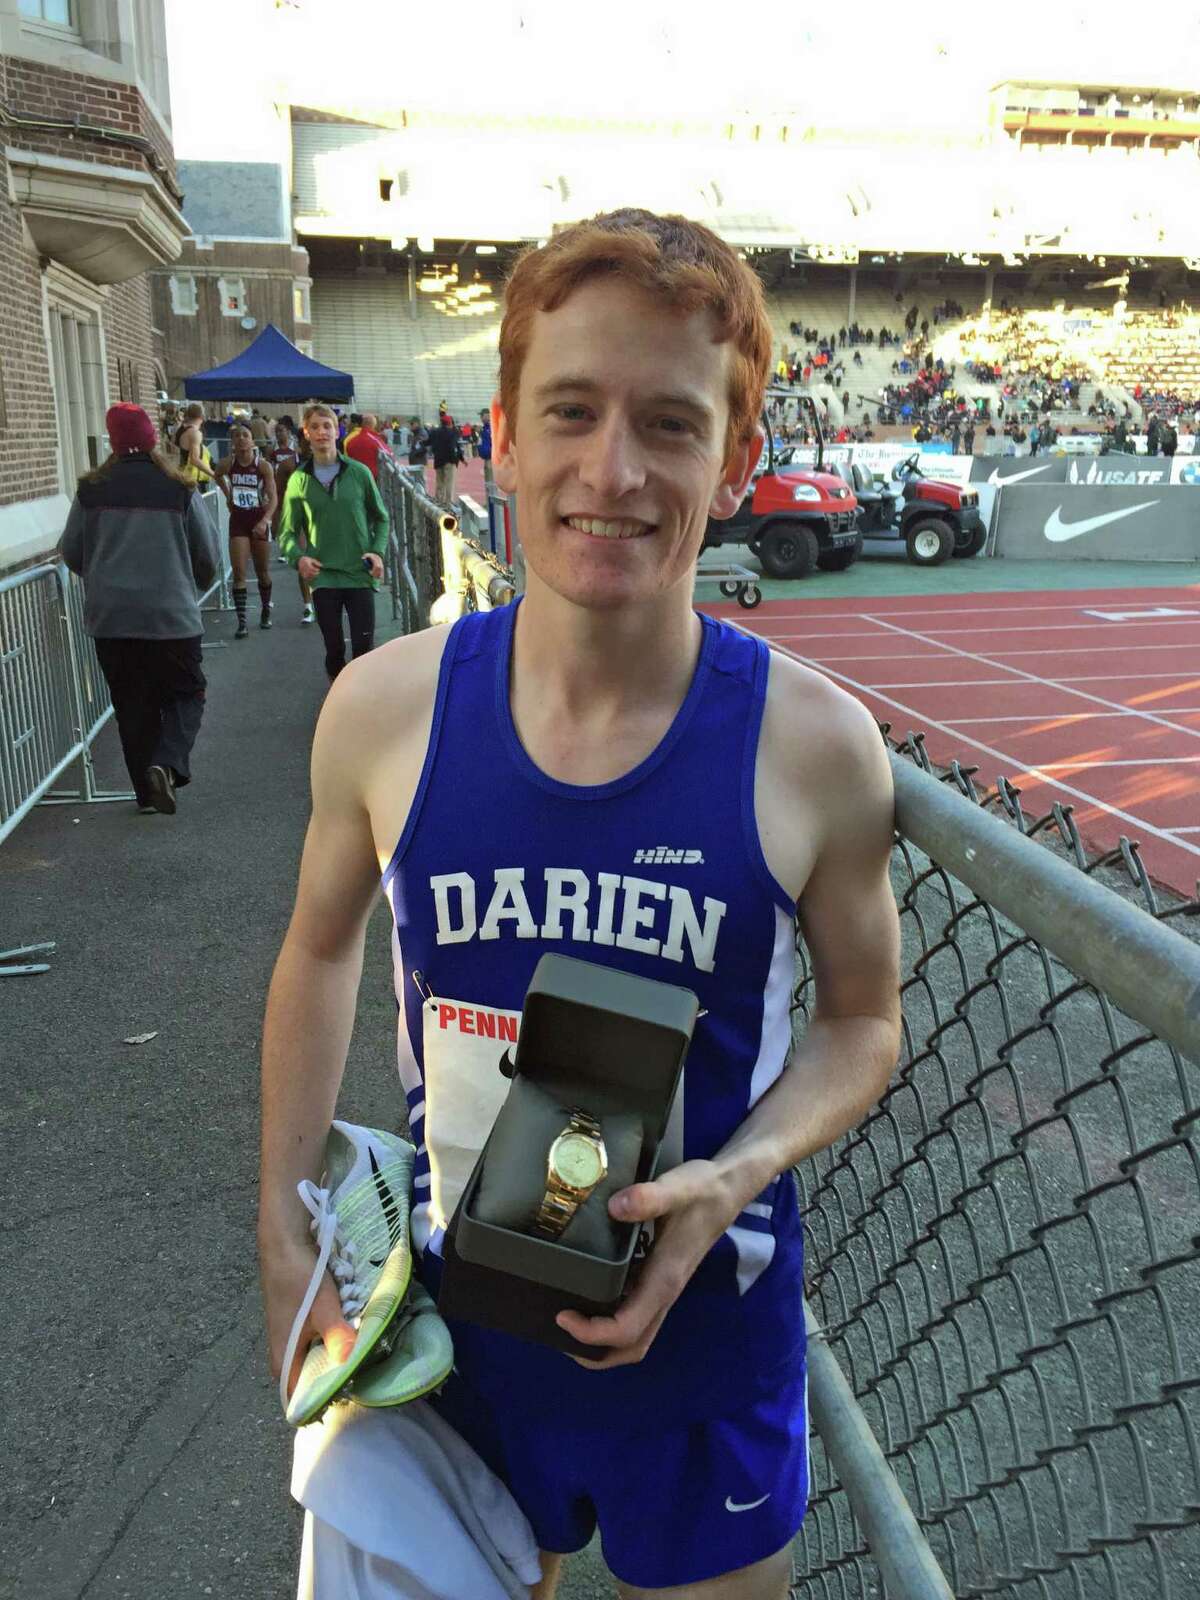 Alex Ostberg poses with a watch, his prize for a victory at the Penn Relays.